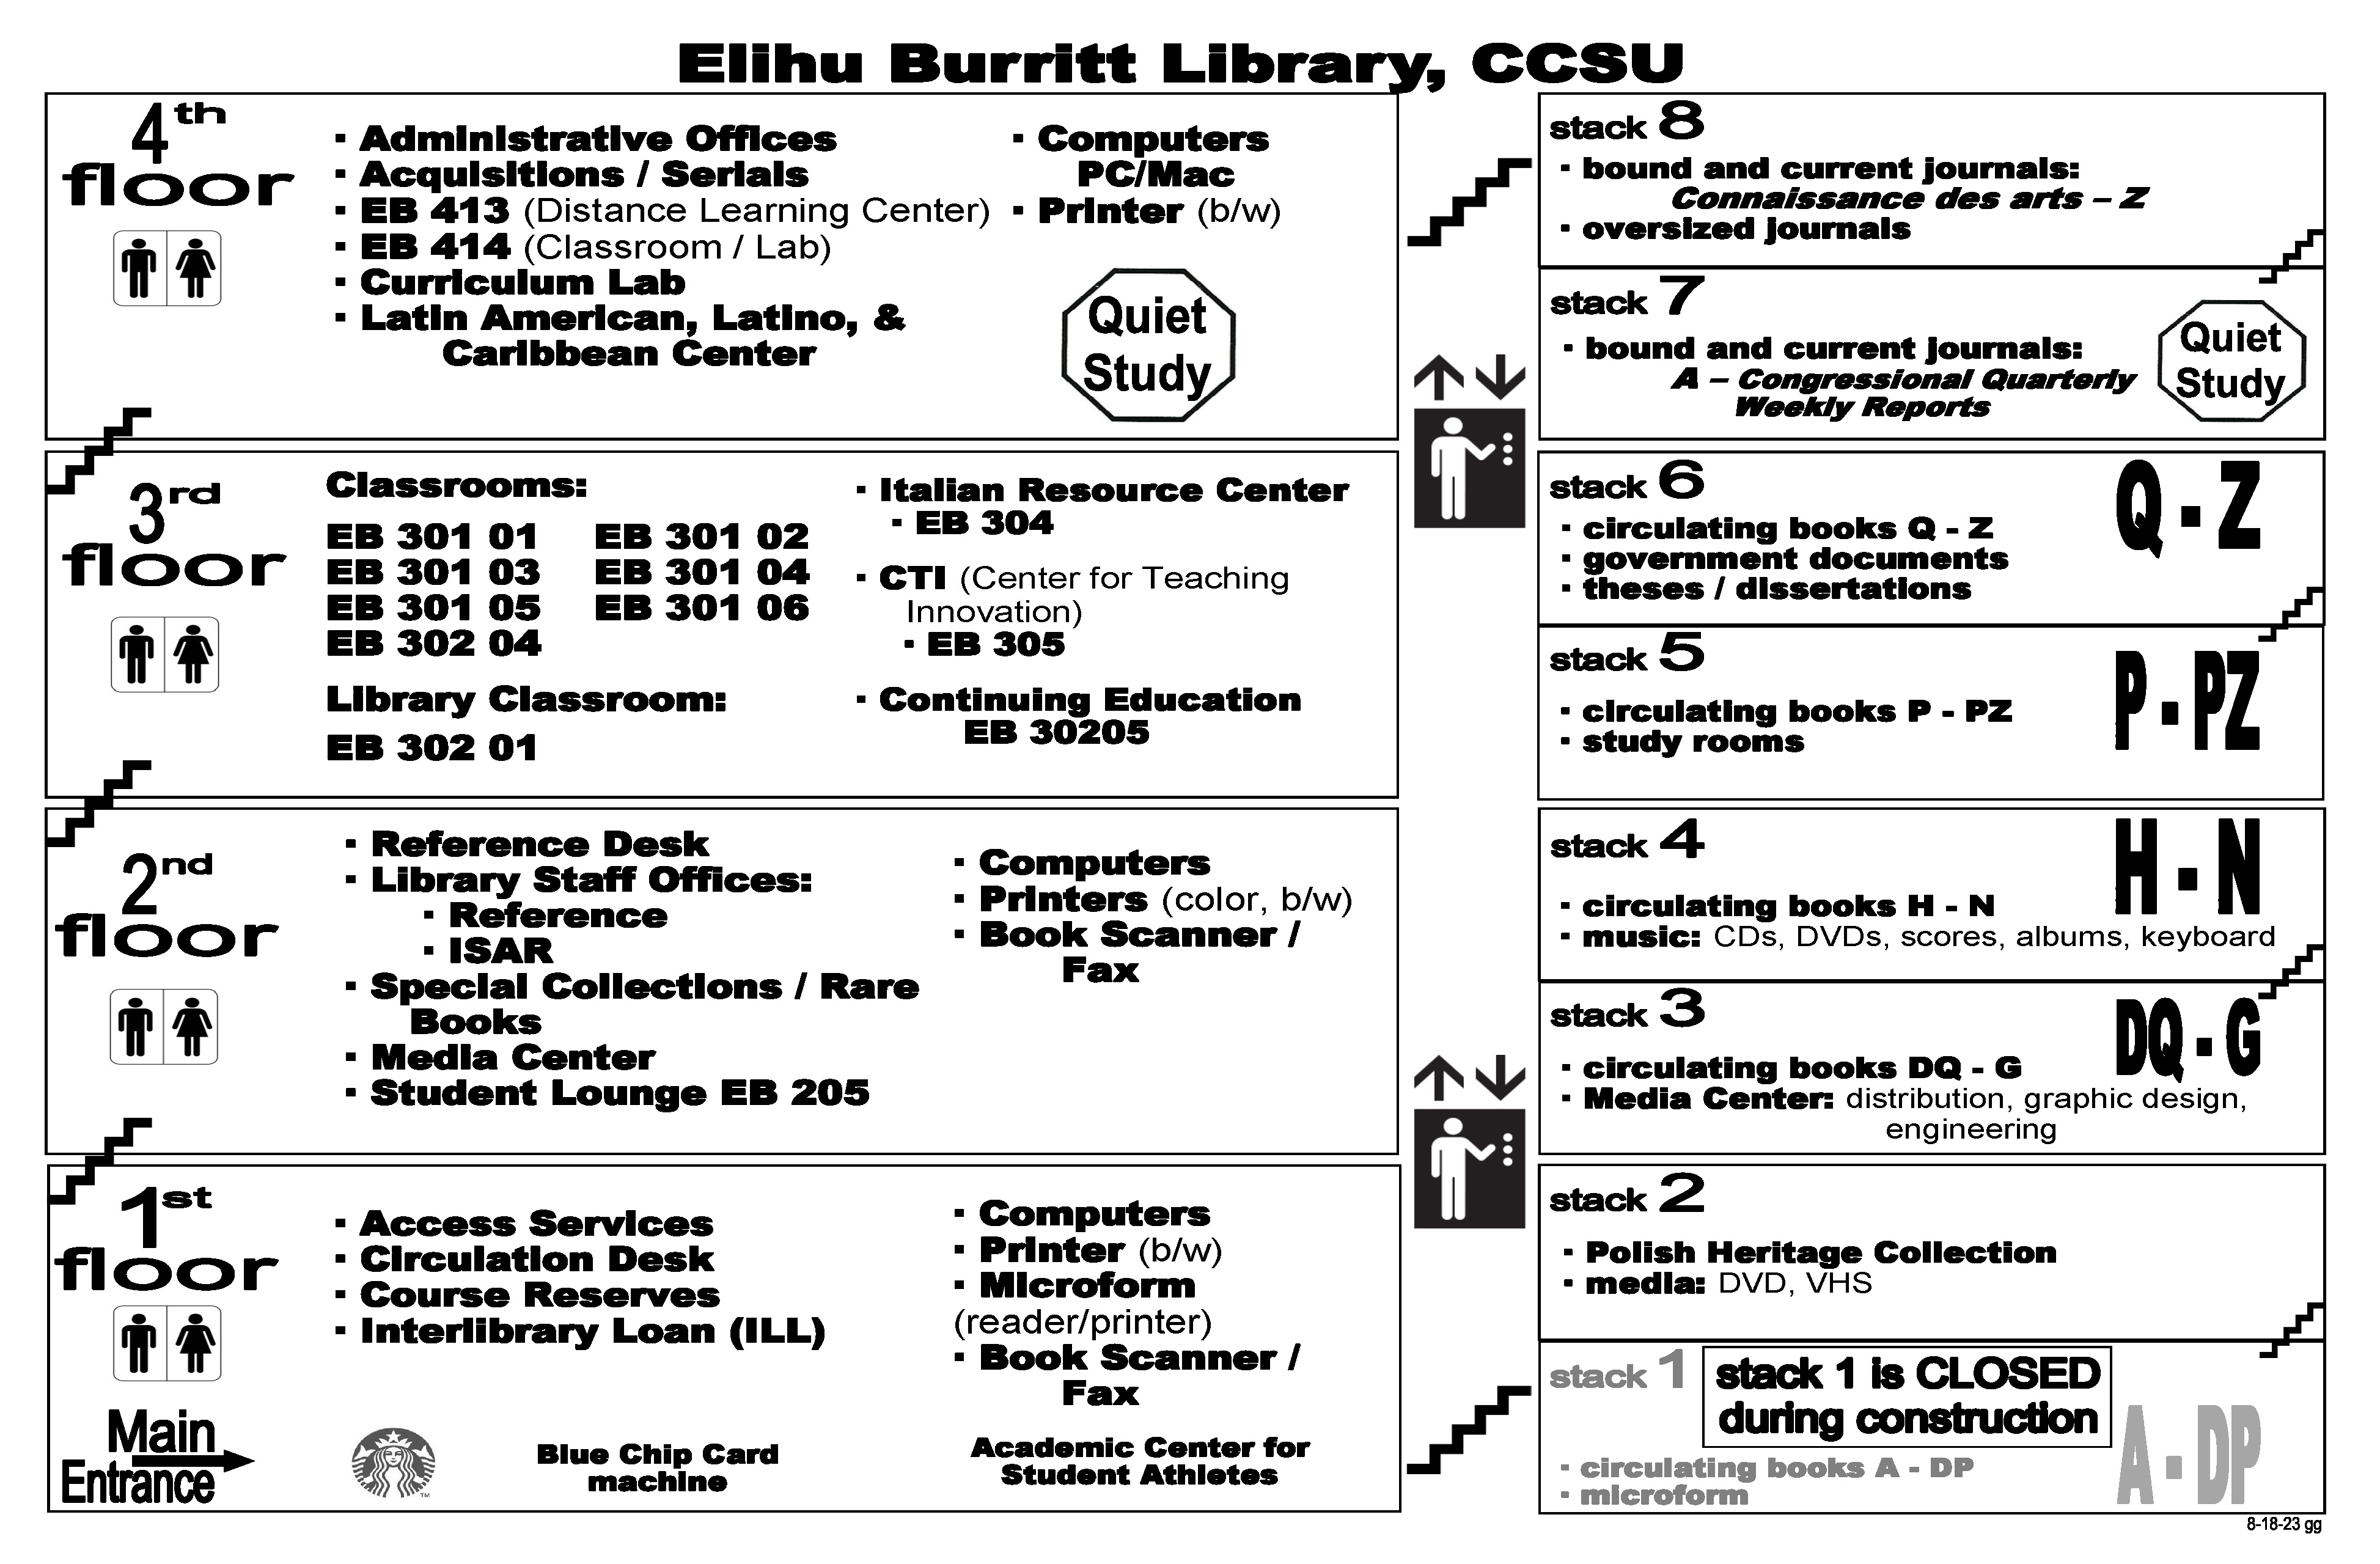 Map of the library for Fall 2023, showing stacks & Stack 1 closed for construction